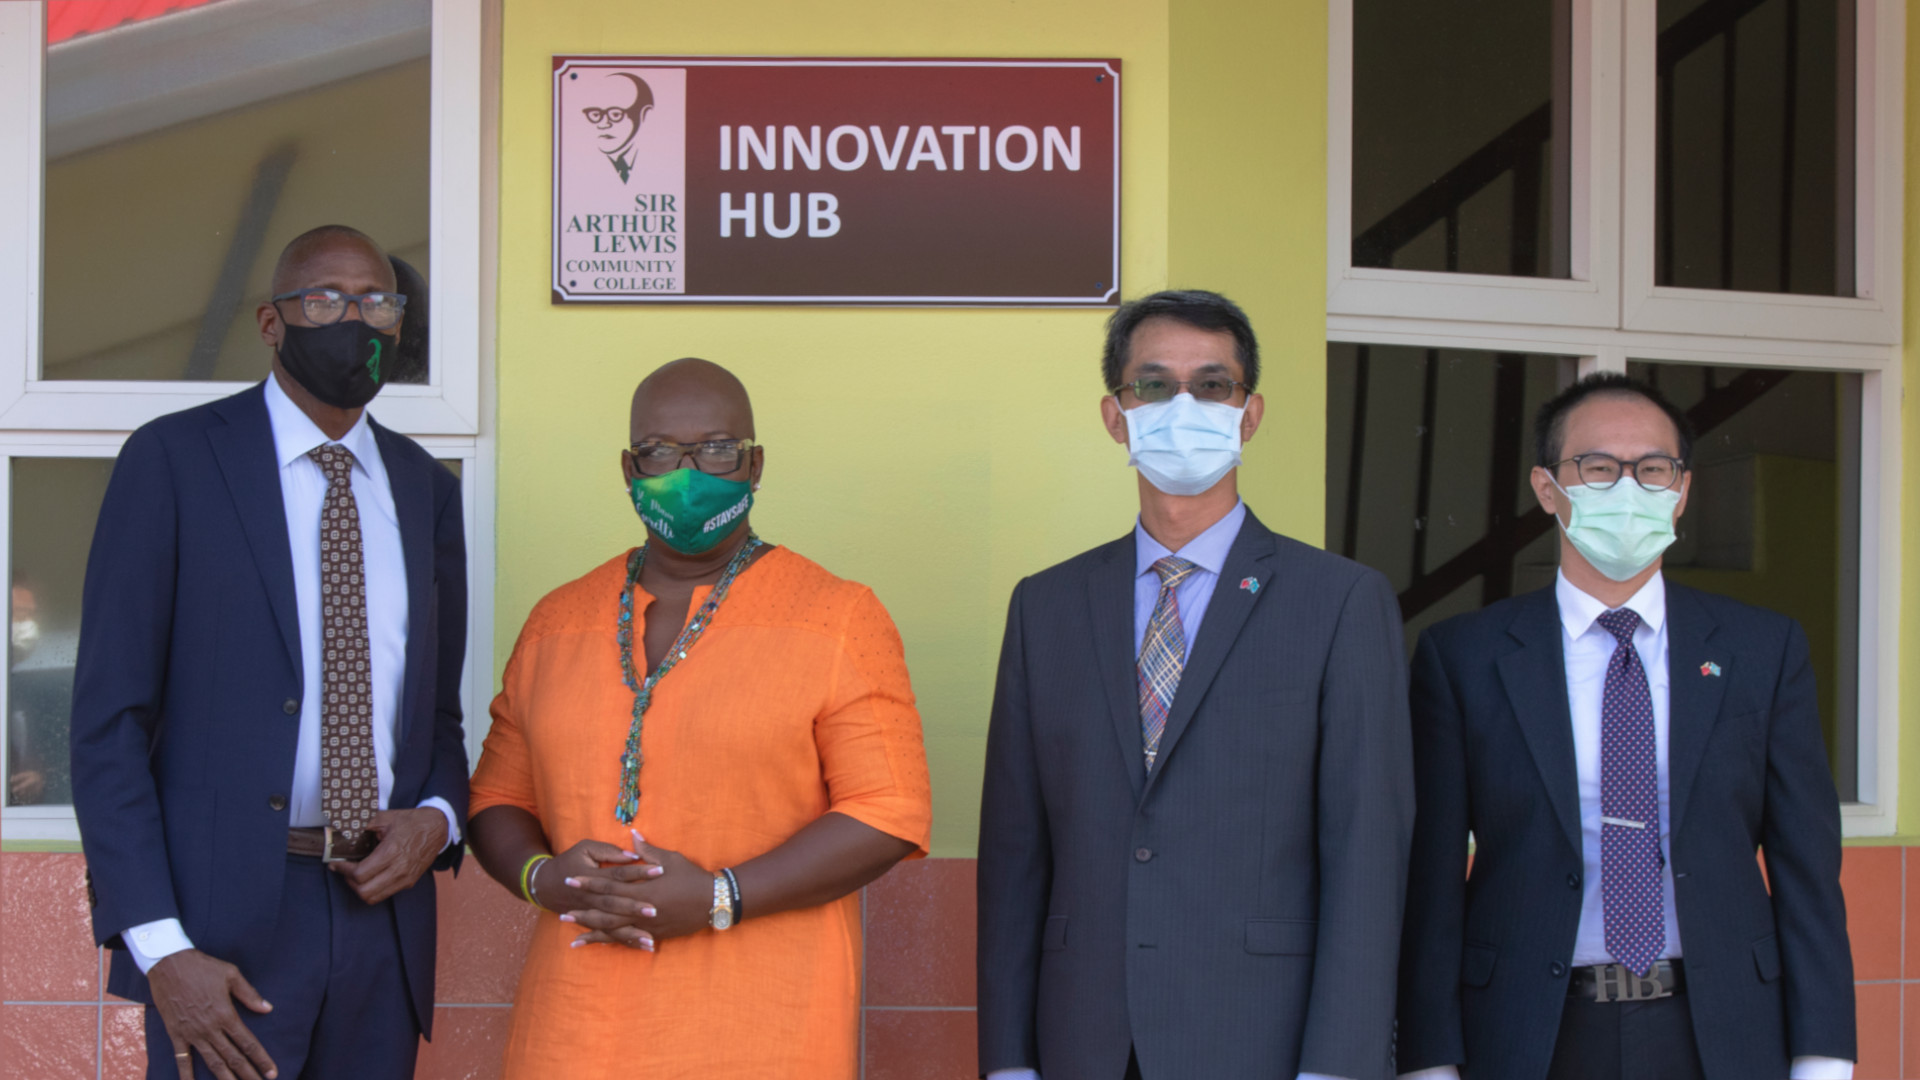 Taiwanese Ambassadors to Saint Lucia pose with Dr. Gale Rigobert and SALCC's then-principal Dr. Keith Nurse before the designated Innovation Hub.